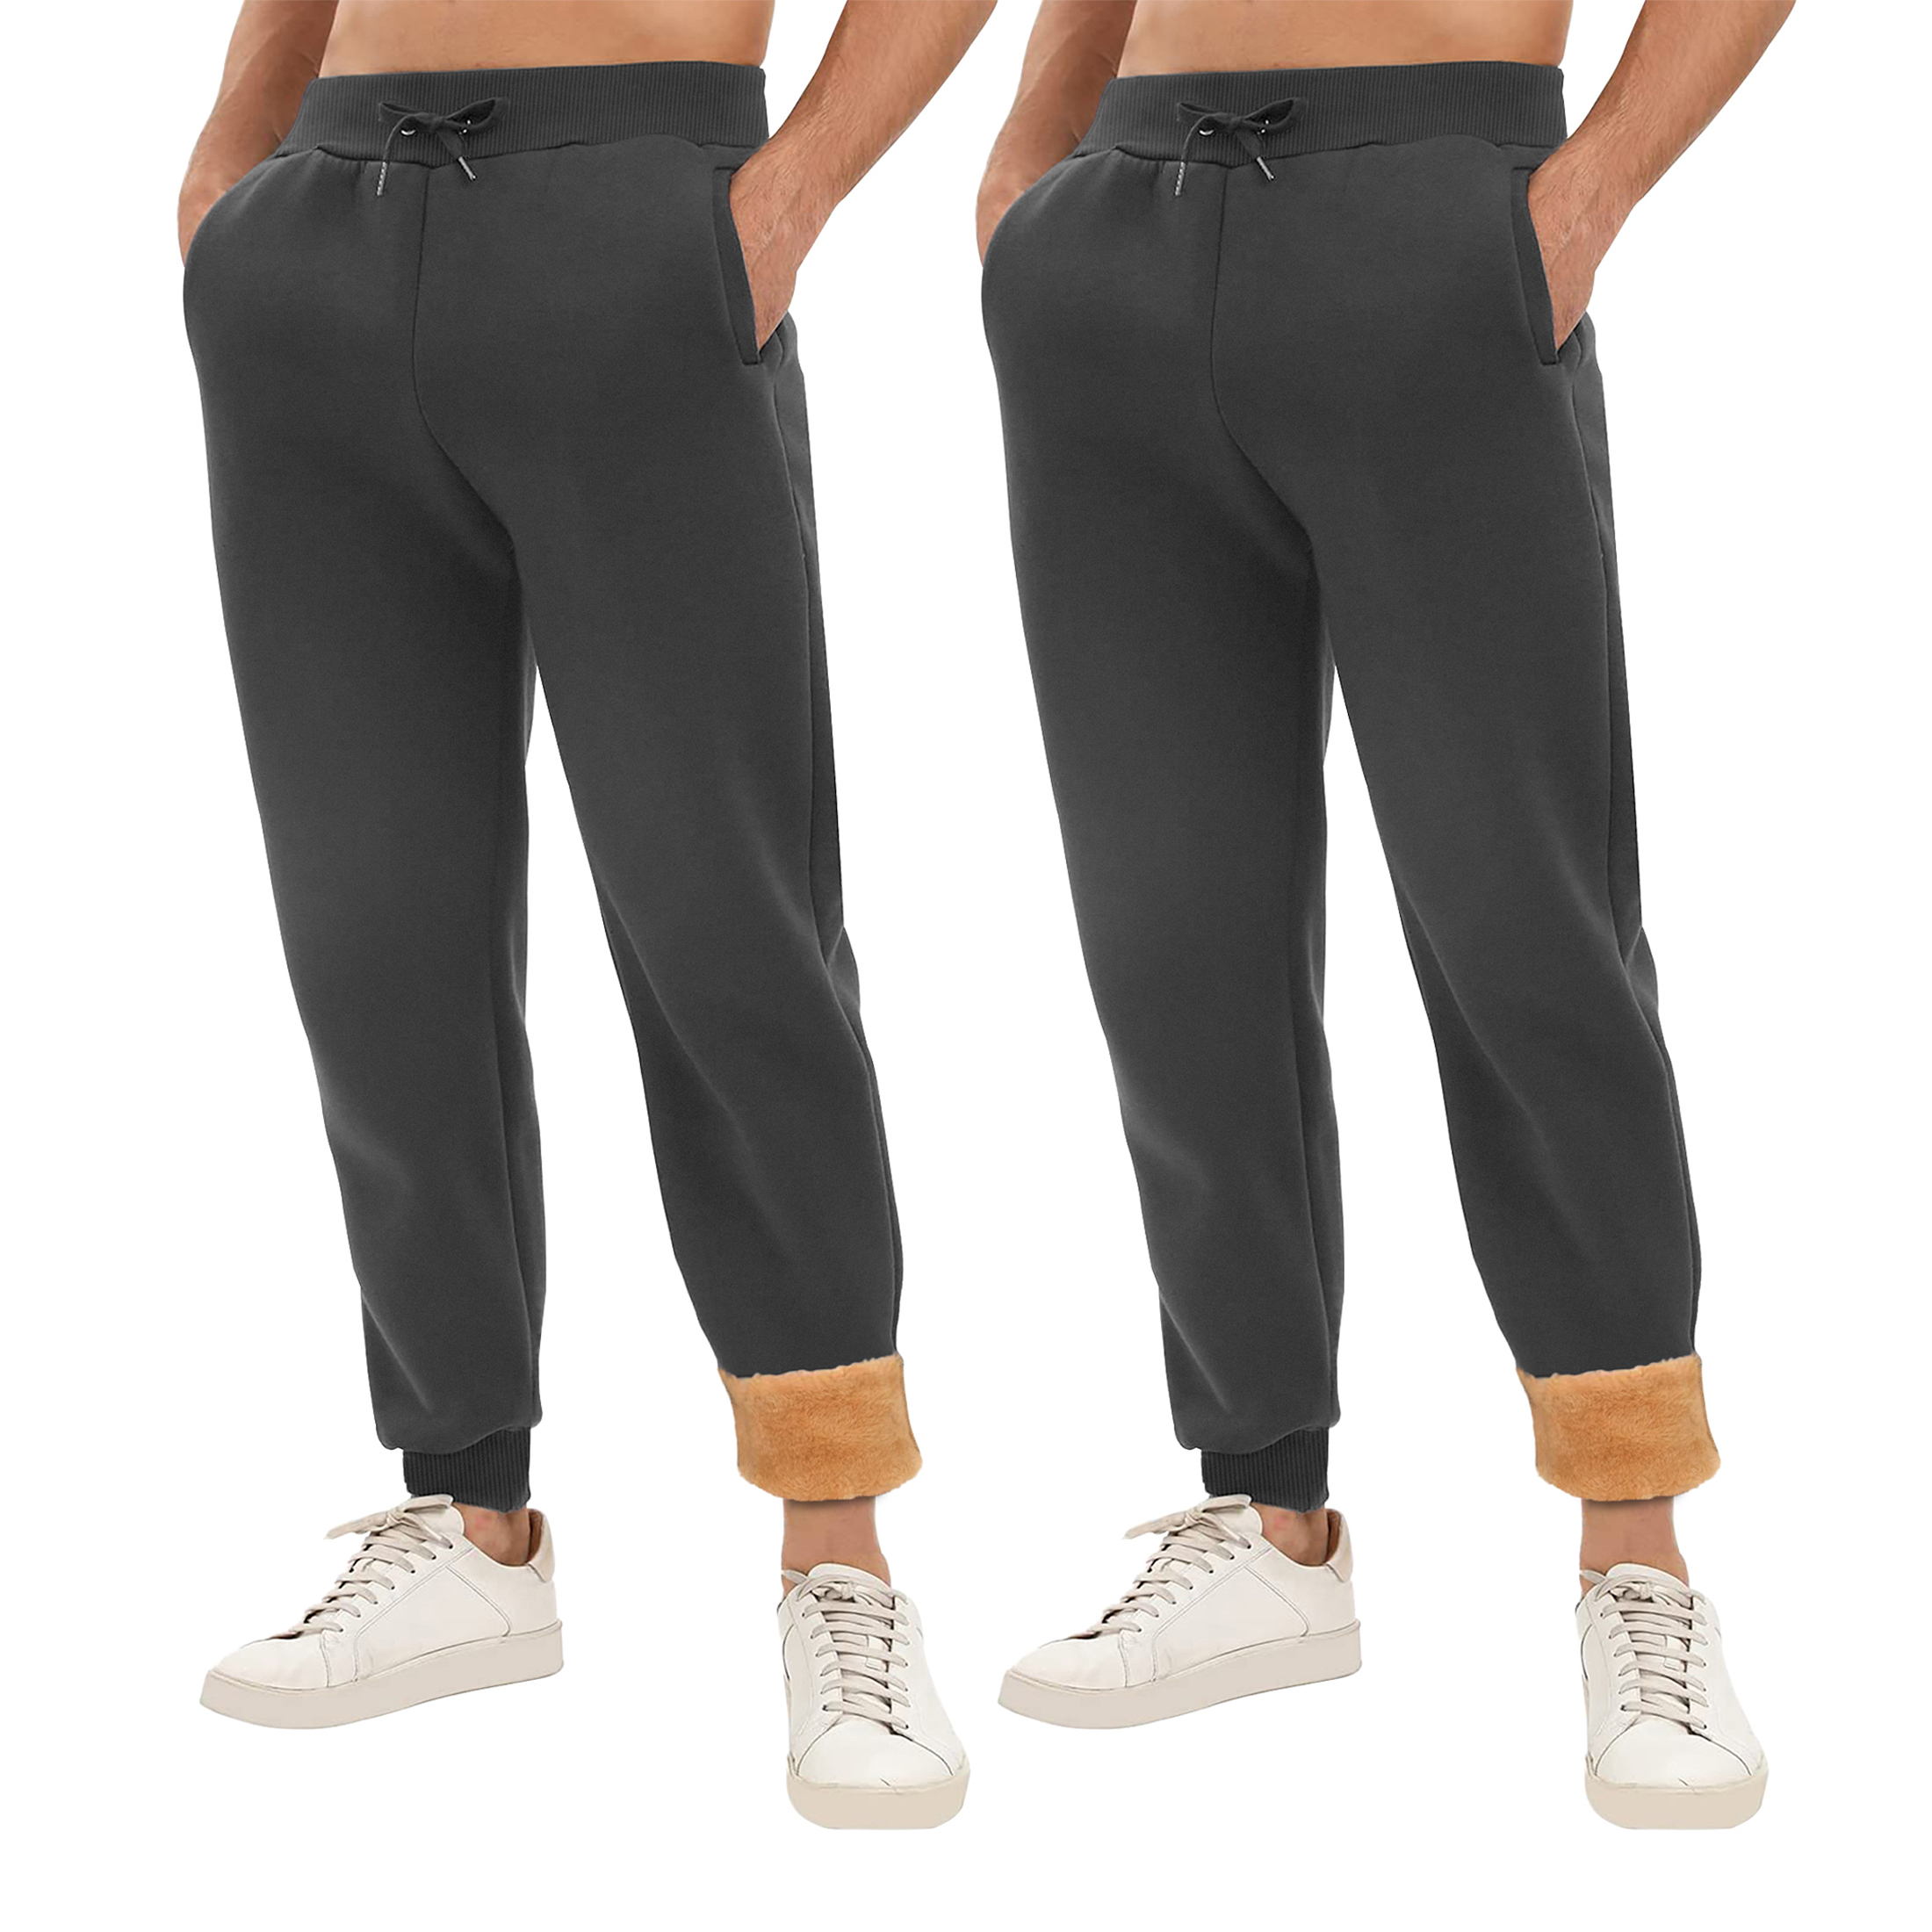 2-Pack: Men's Winter Warm Thick Sherpa Lined Jogger Track Pants With Pockets - Charcoal, Small